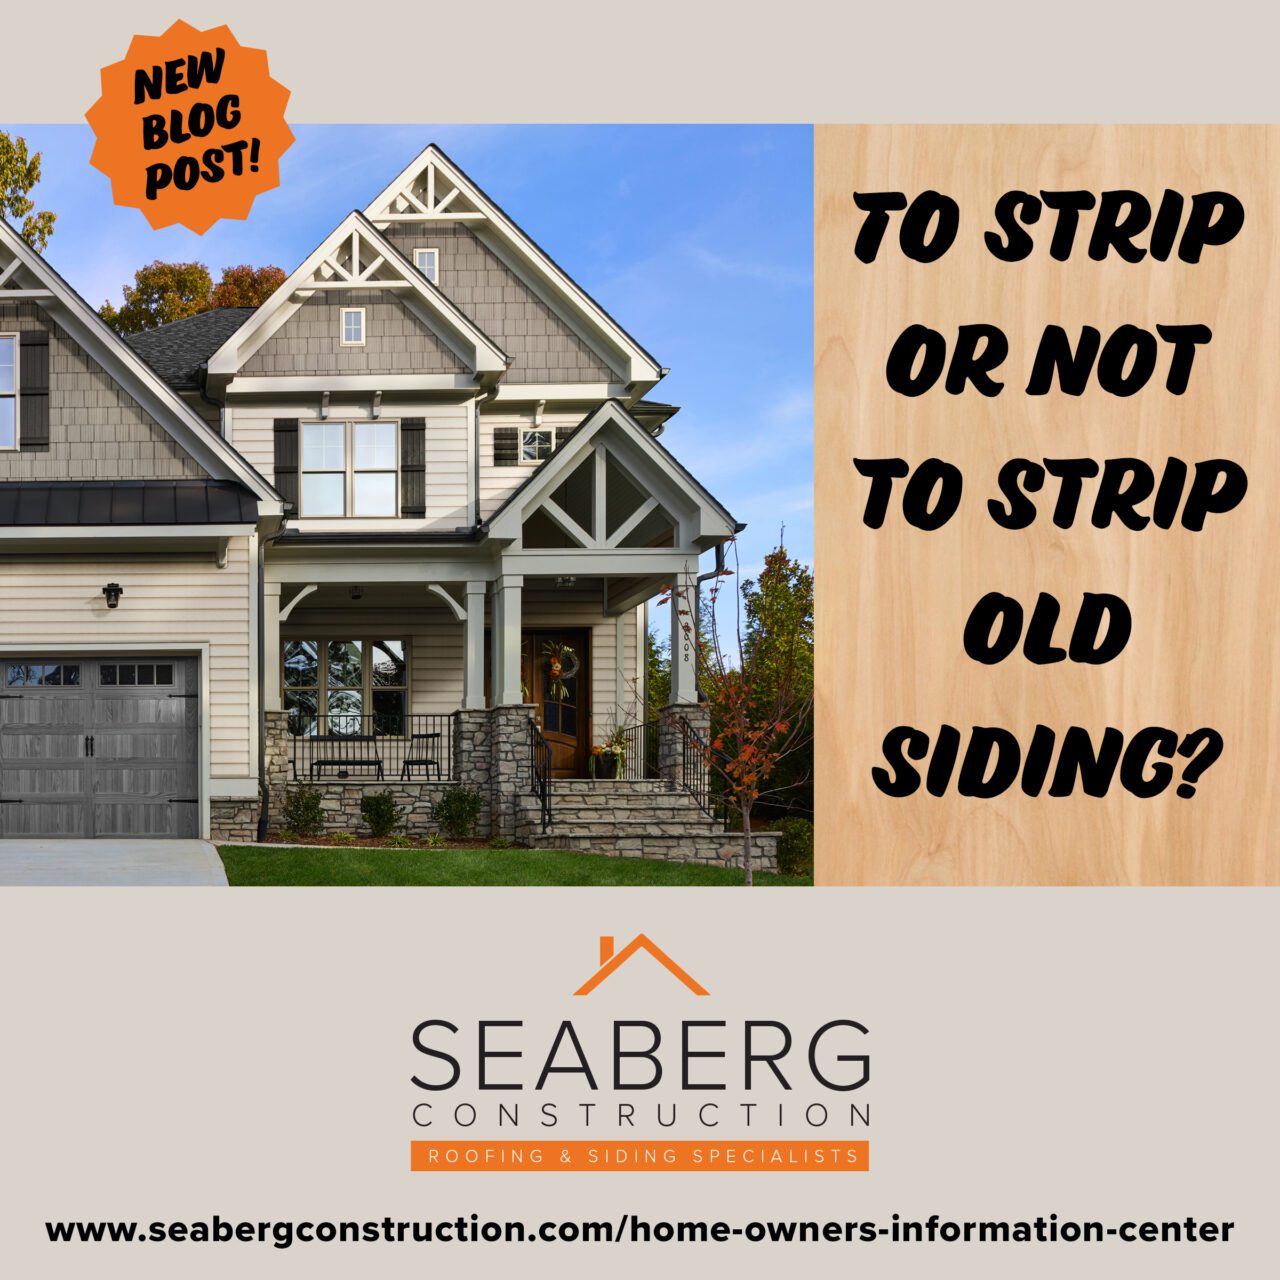 Seaberg Construction Blog: To Strip or Not to Strip Siding